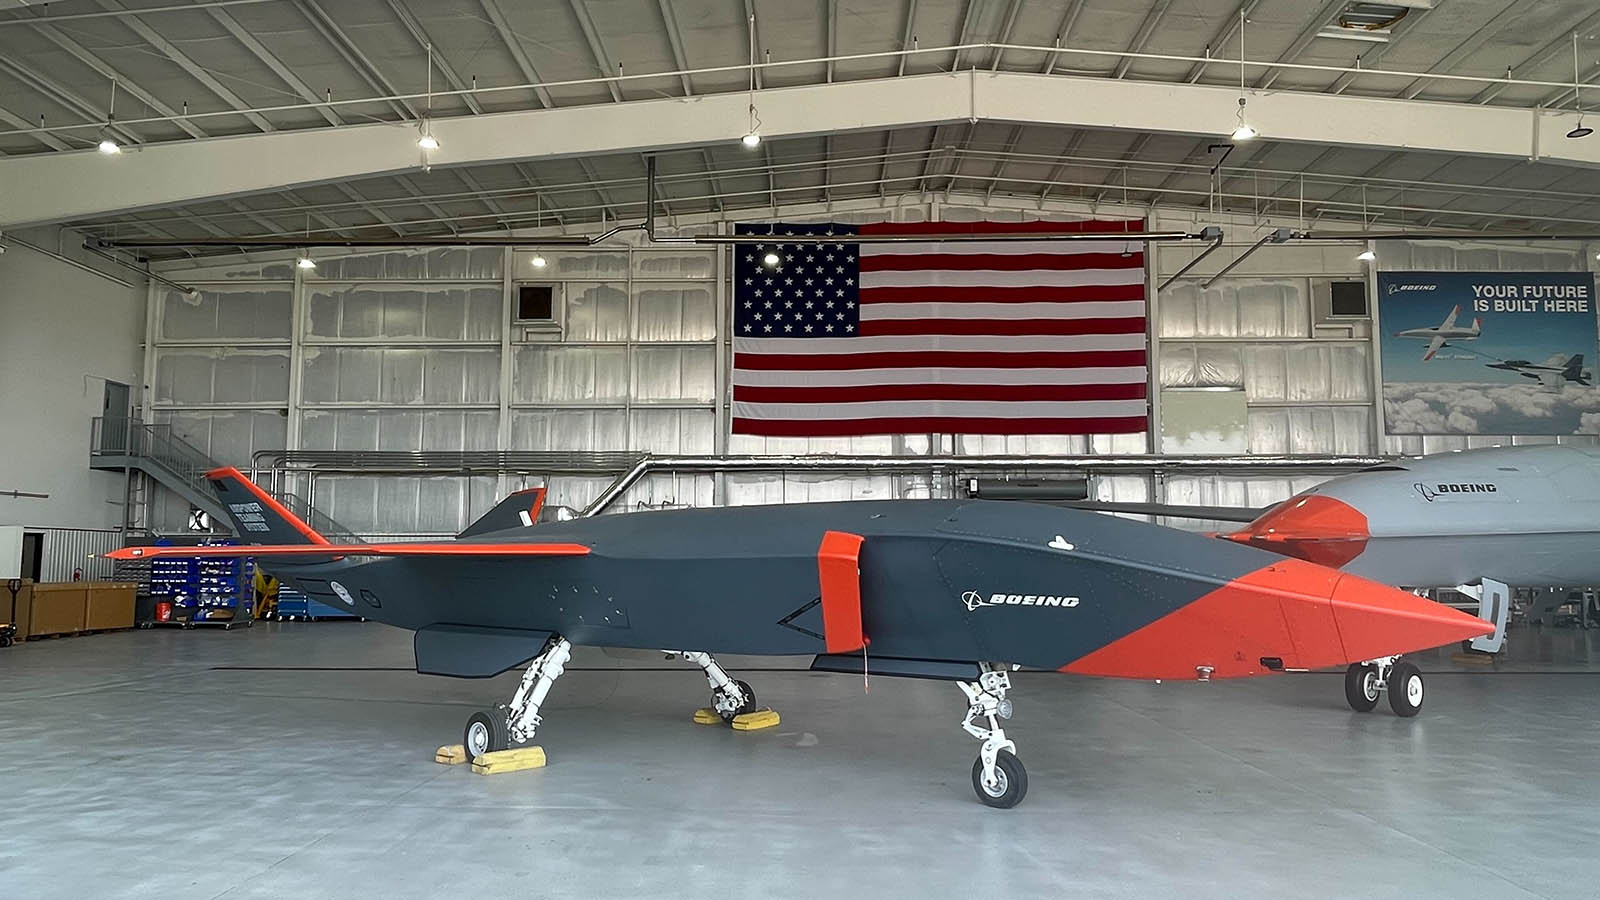 Boeing’s Ghost Bat loyal wingman drone spotted hanging in US